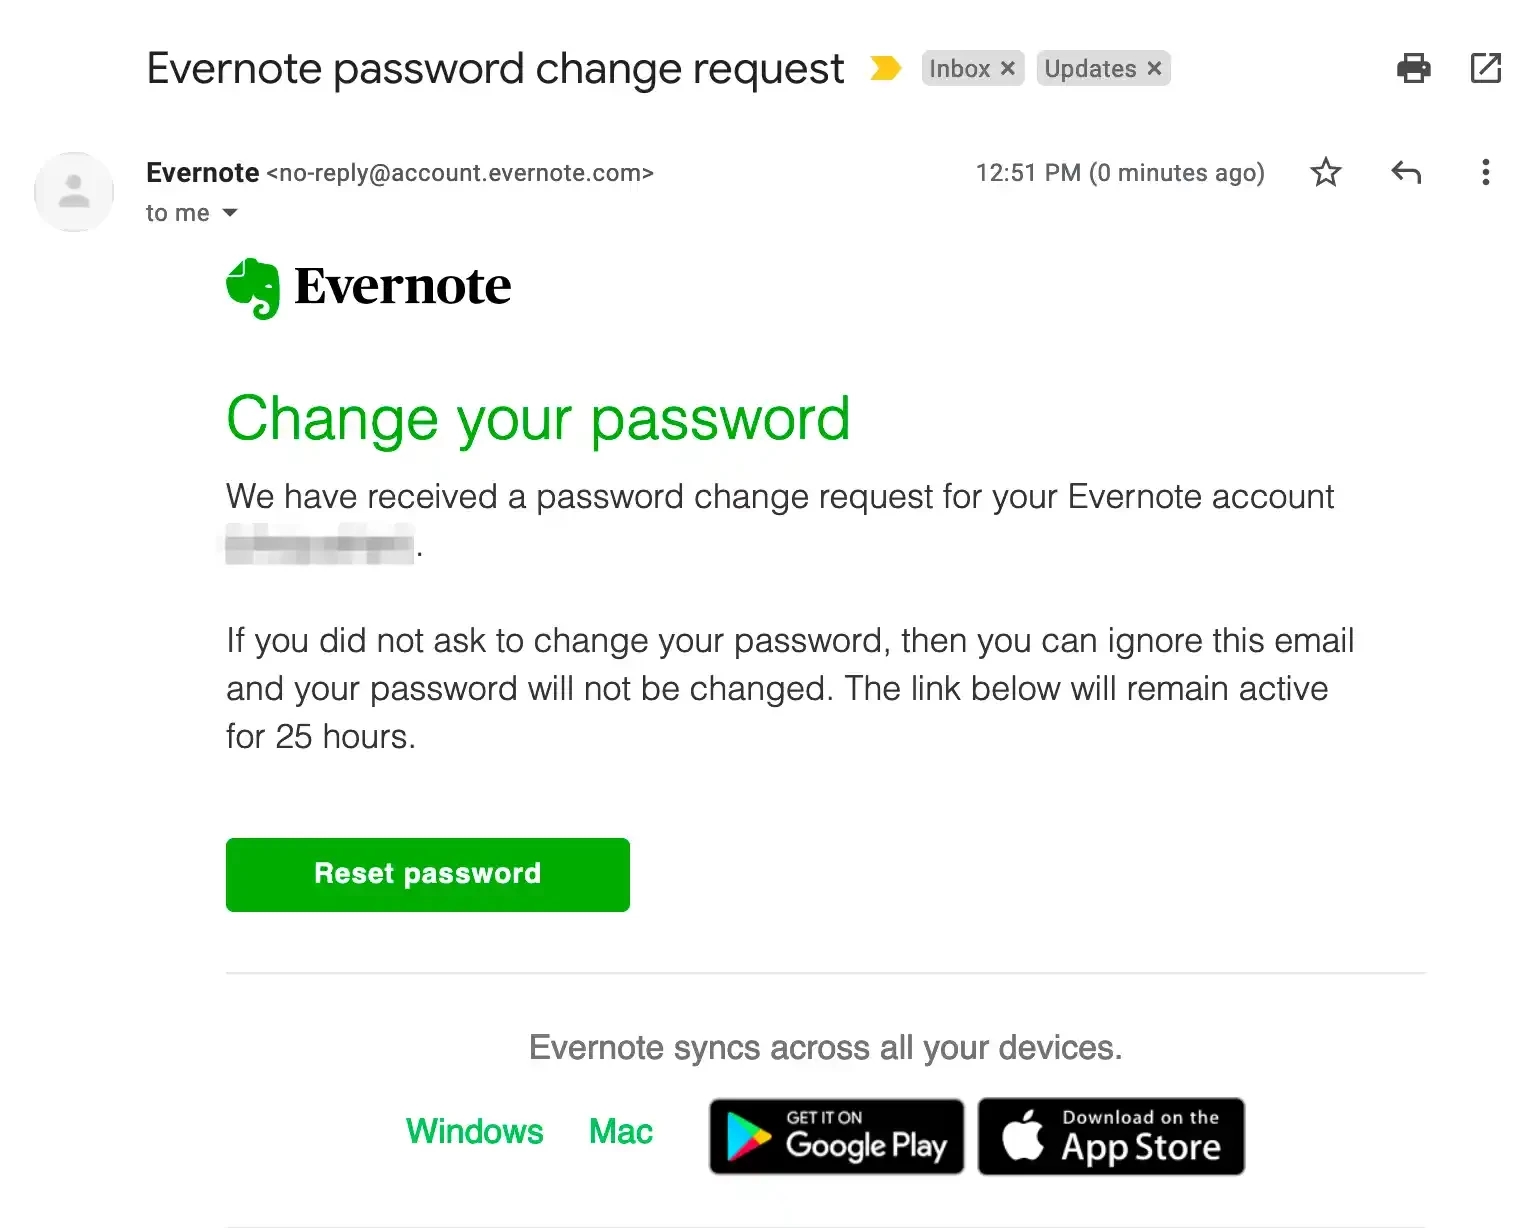 Evernote password reset email